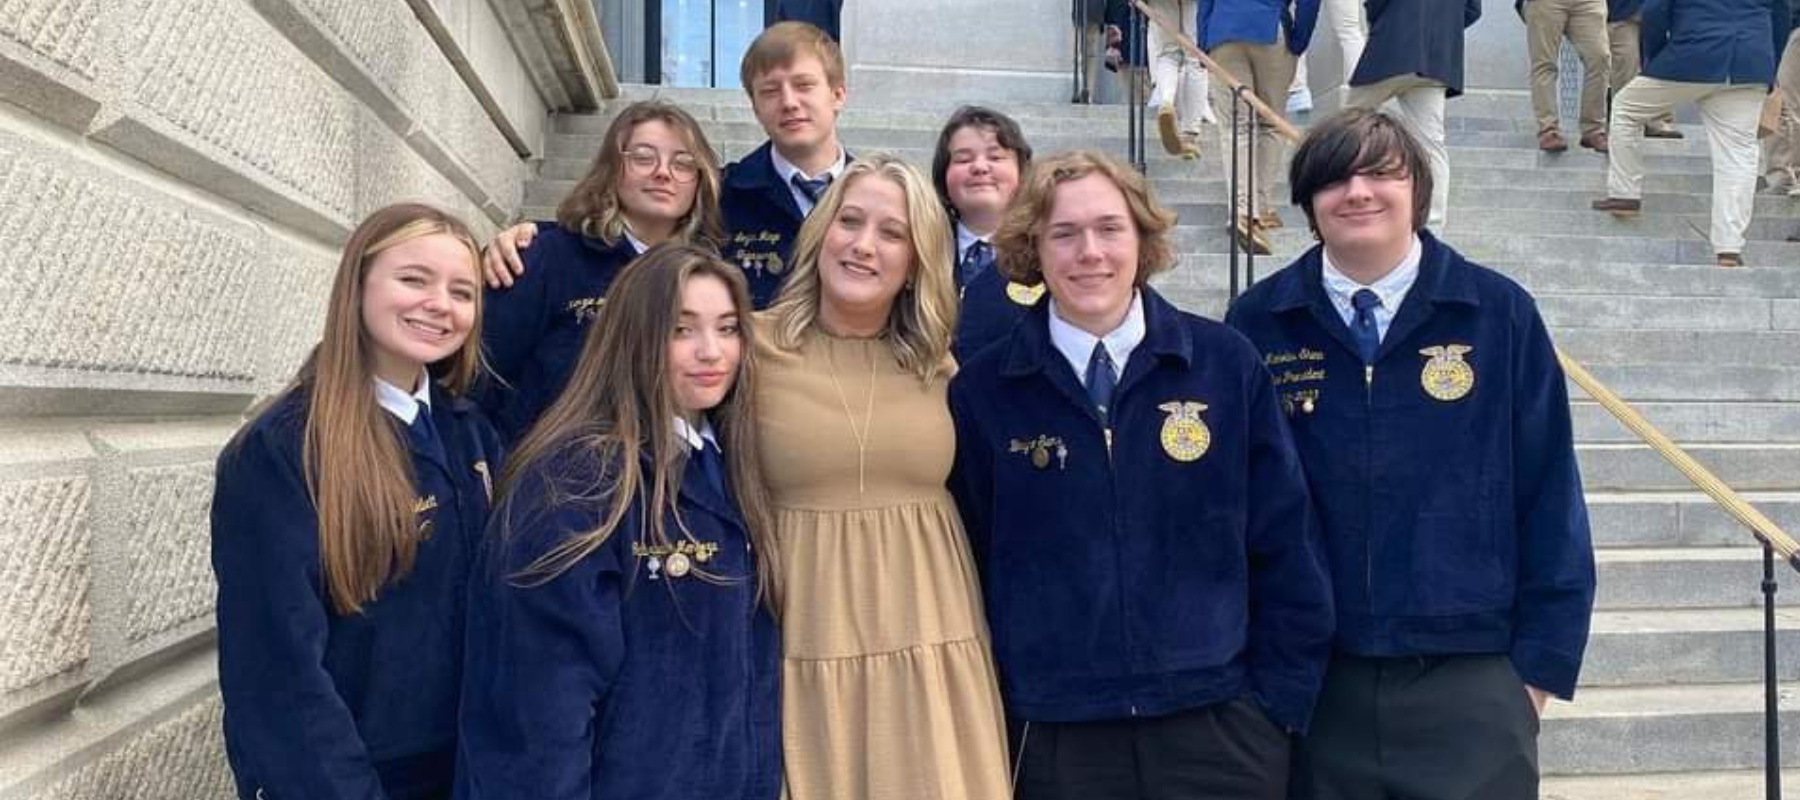 Ag class at the State Convention